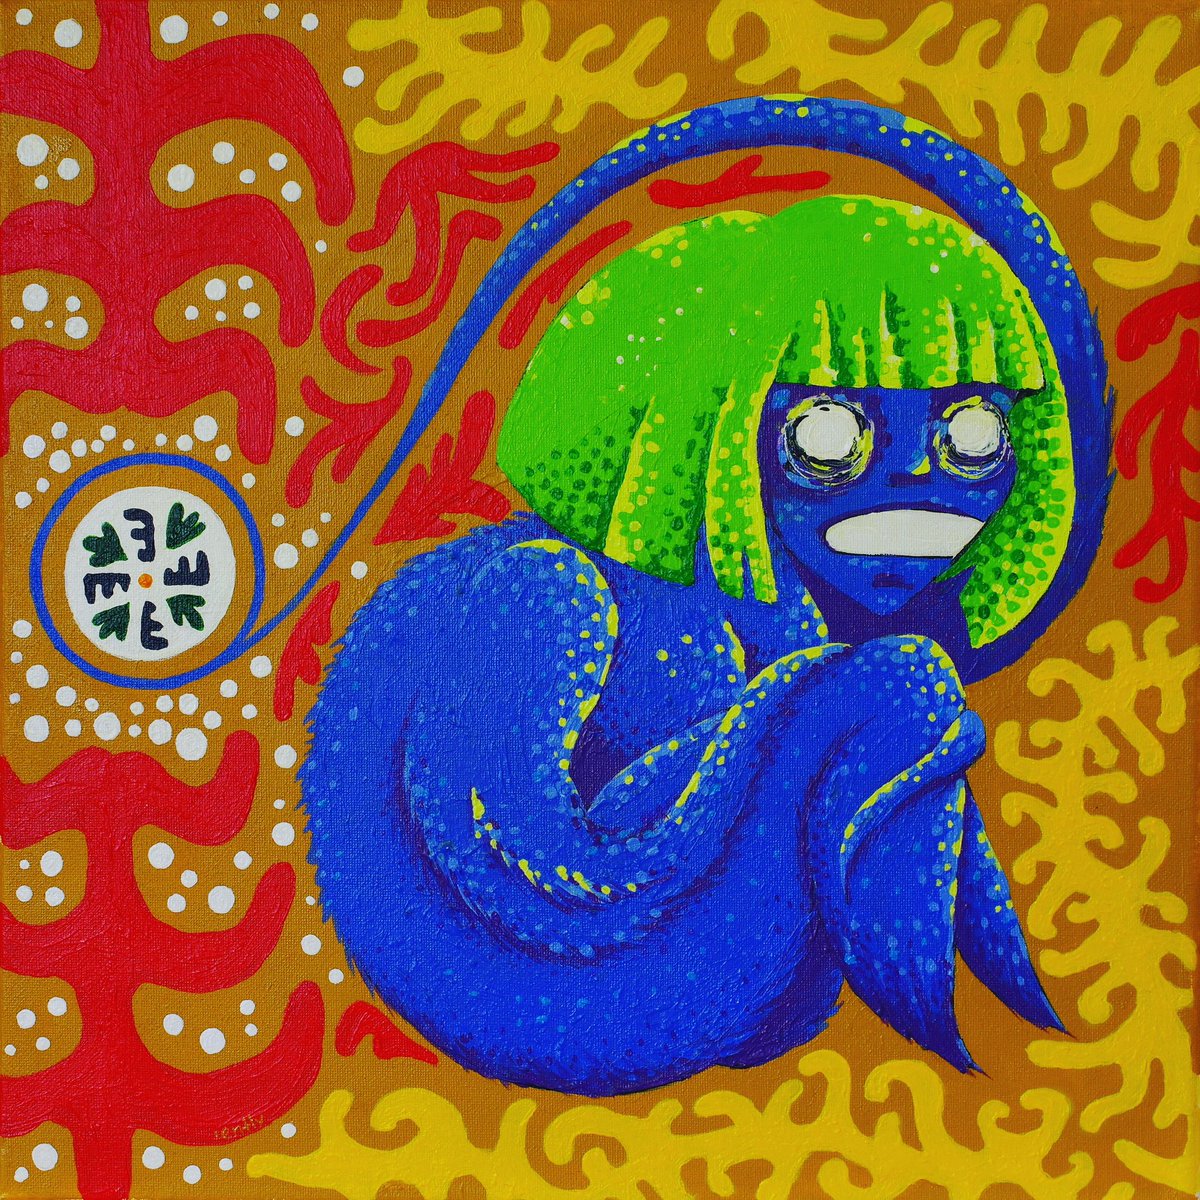 Savage.
Canvas. Acrylic. 40x40.
The ornament is based on a pattern of sacred Kaitag embroidery, not intended for public admiration

.
 #expressionism #neorxpressionism #expressionismart #modernart #outsiderart #contemporaryart #outsiderartist #outsiderart #acryliconcanvas